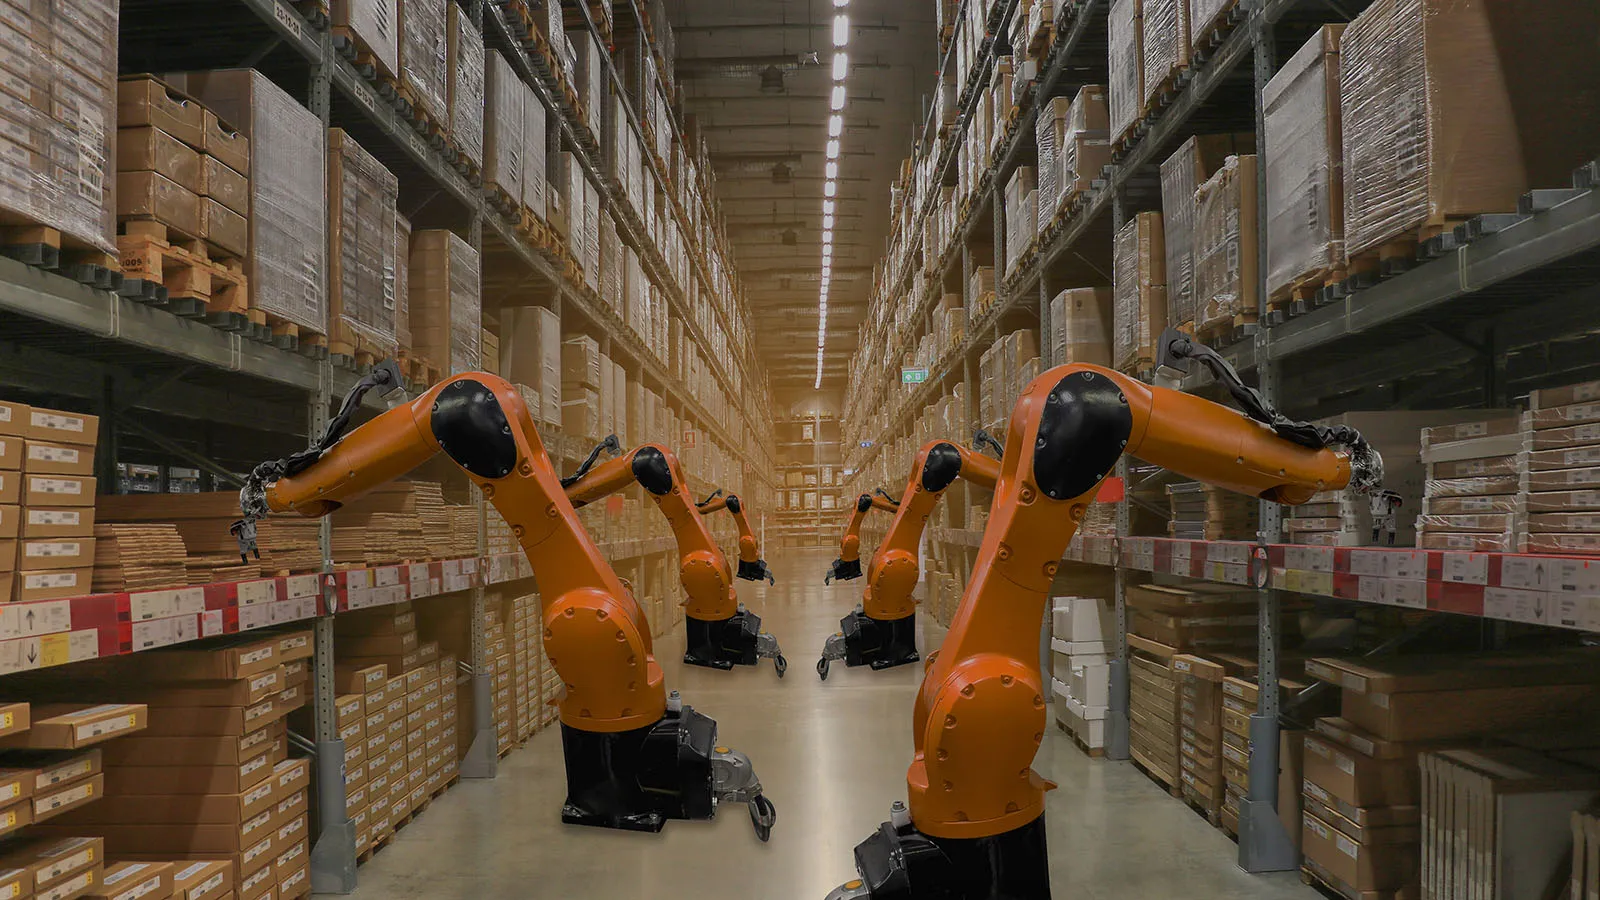 Orange robots in a large packaging warehouse